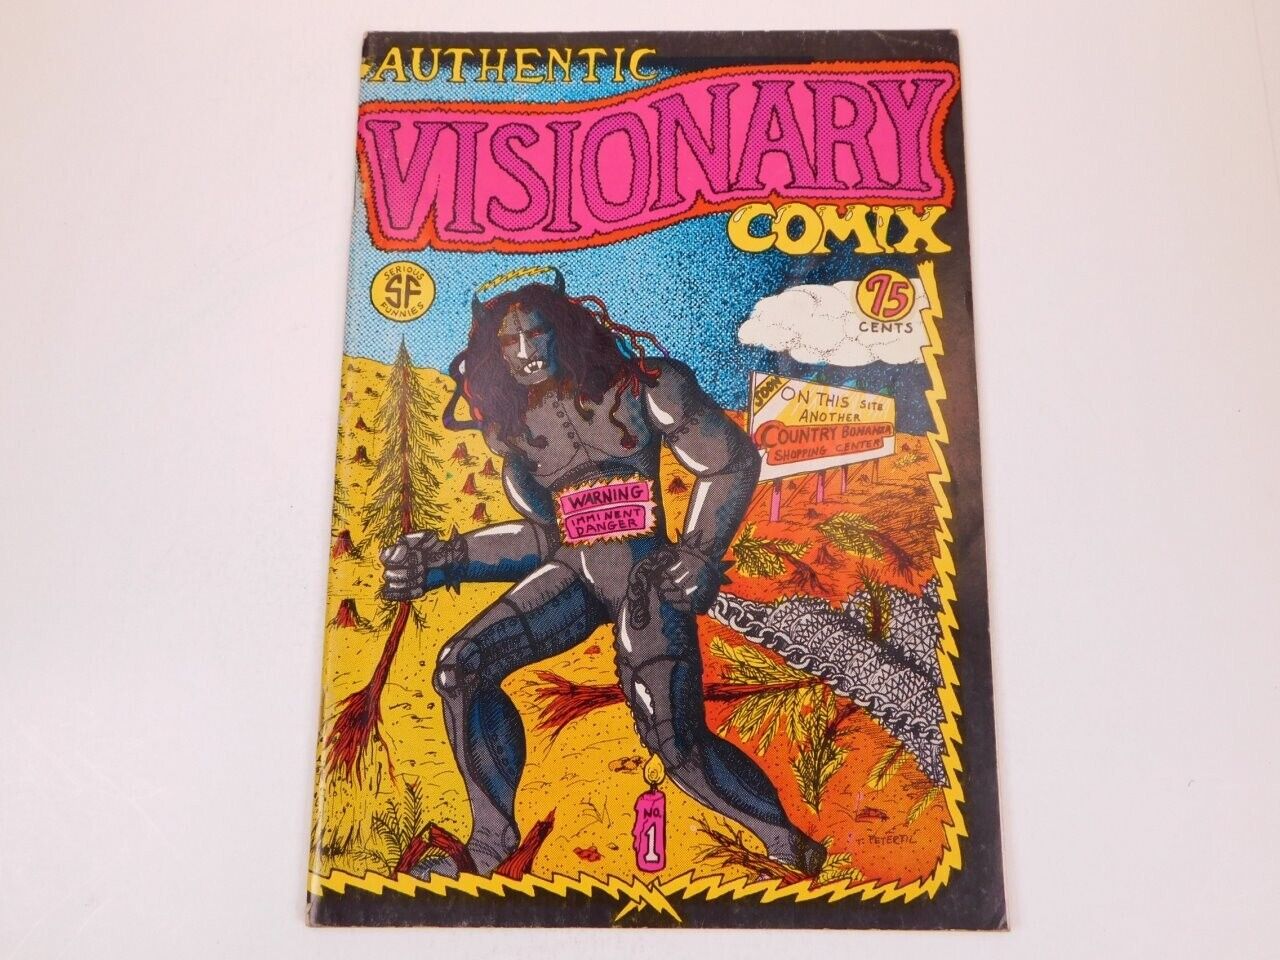 Authentic Visionary Comix VG+ Only 2000 Copies 1st Print Underground Comics